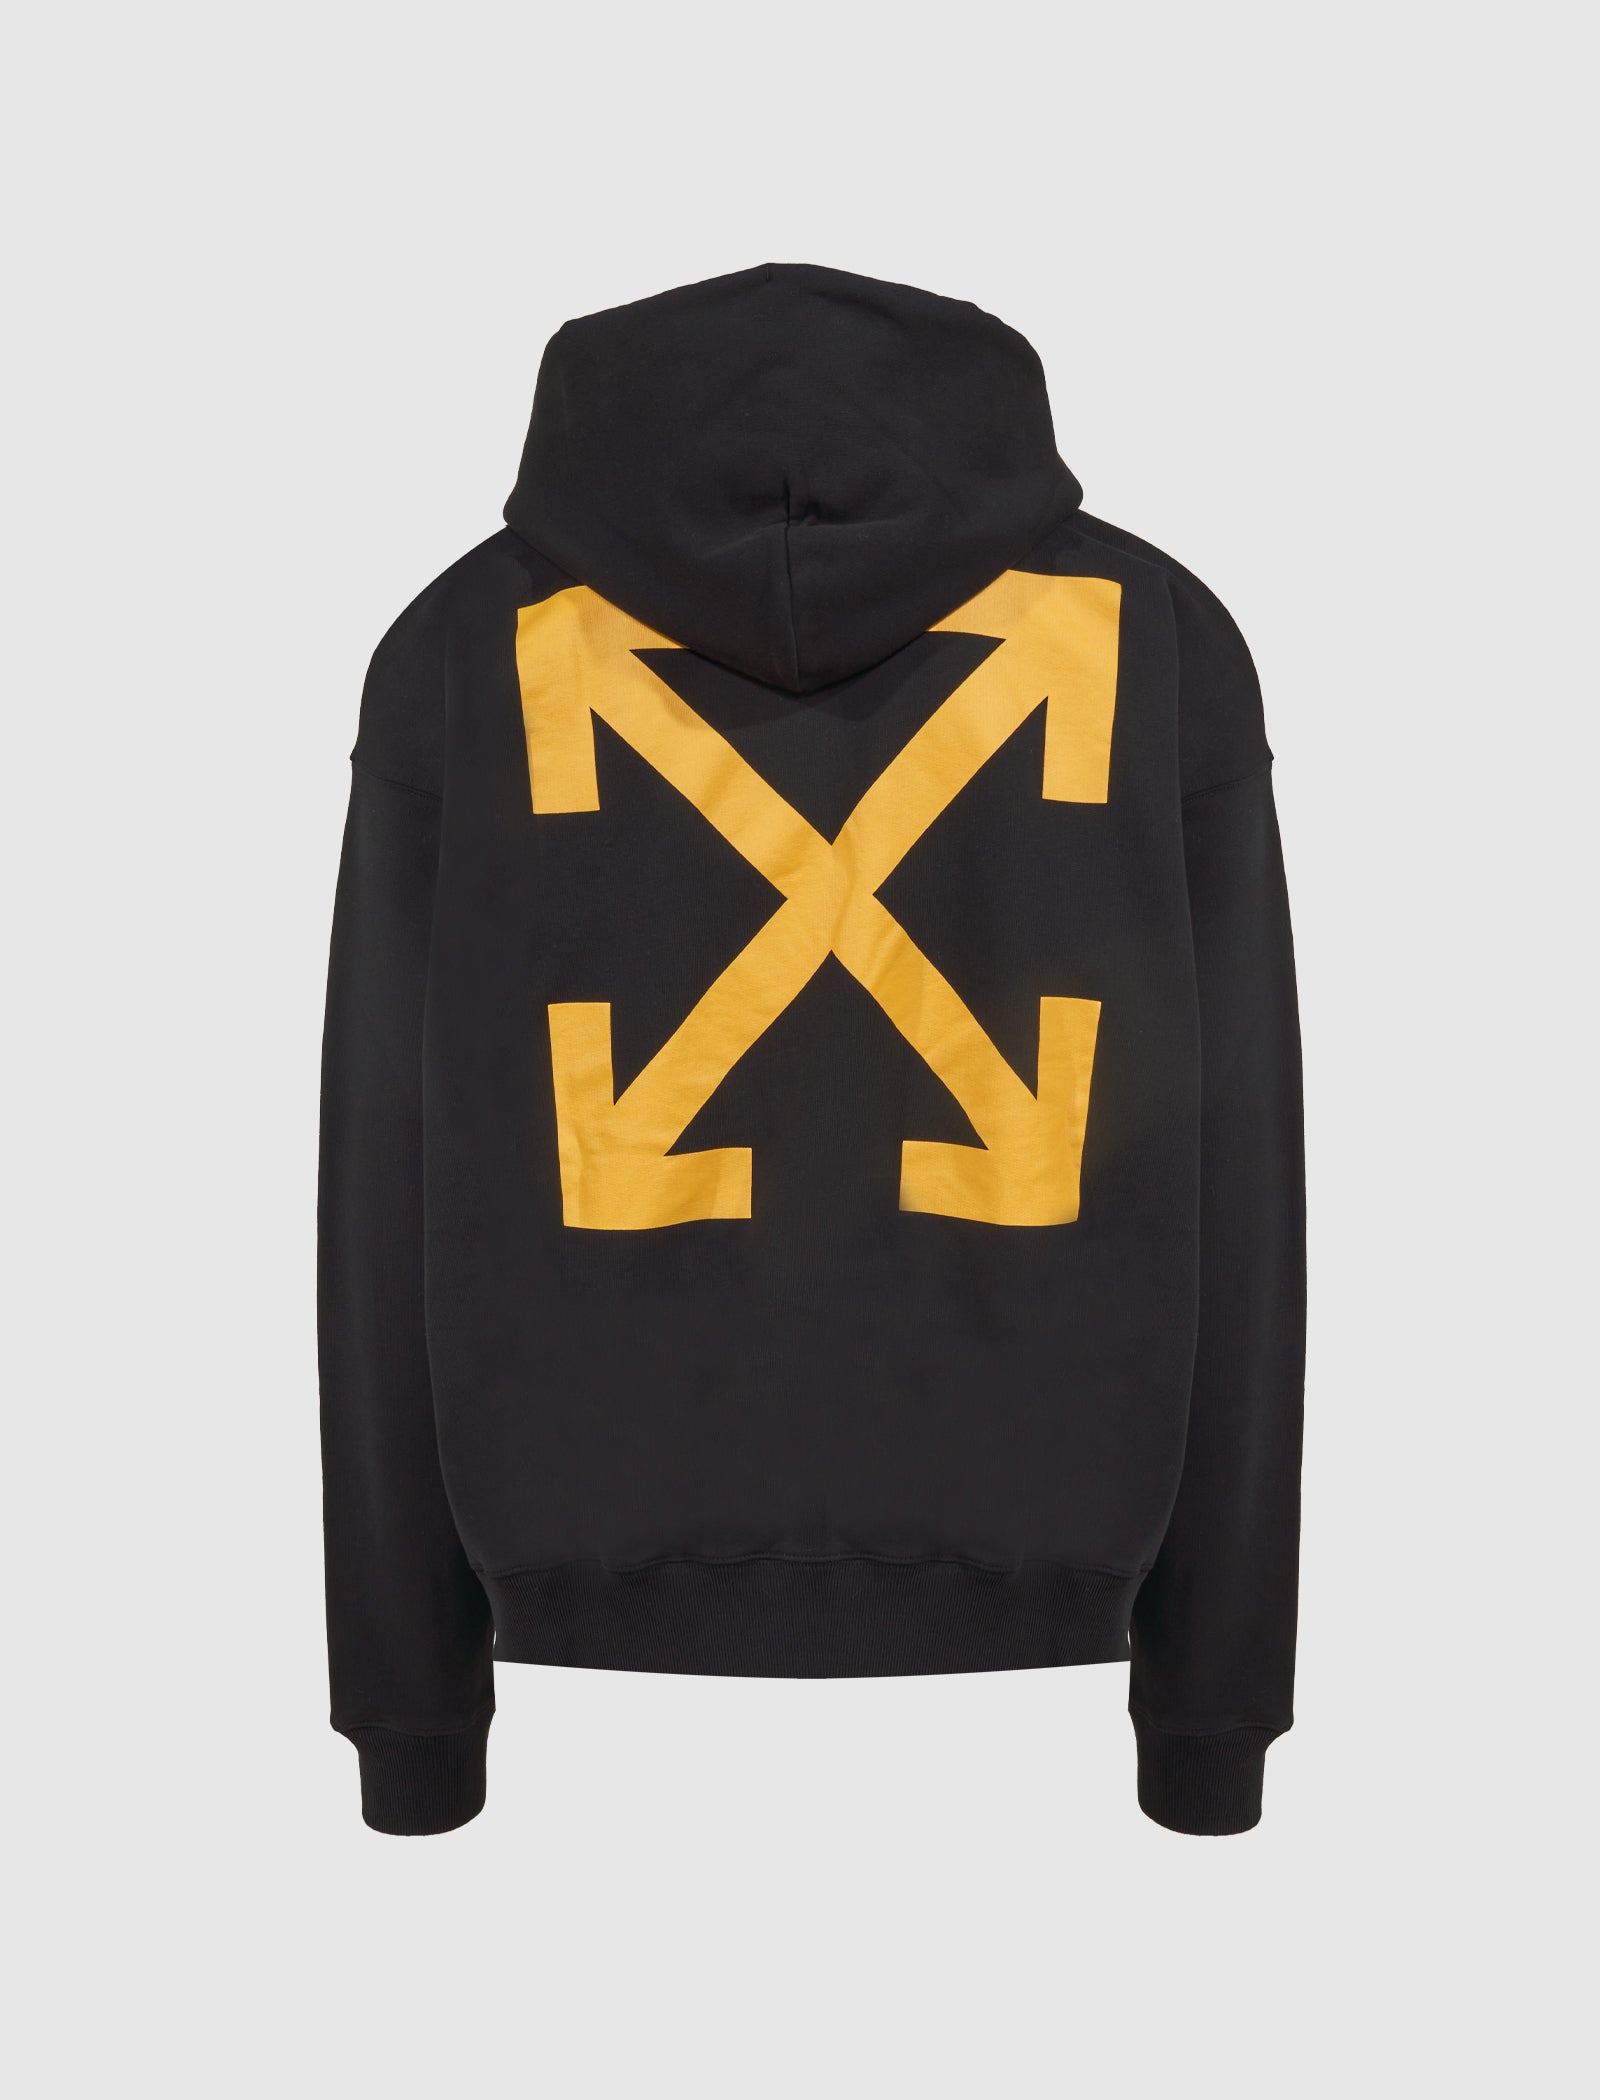 OFF-WHITE ARROWS CARAVAGGIO MERCY HOODIE